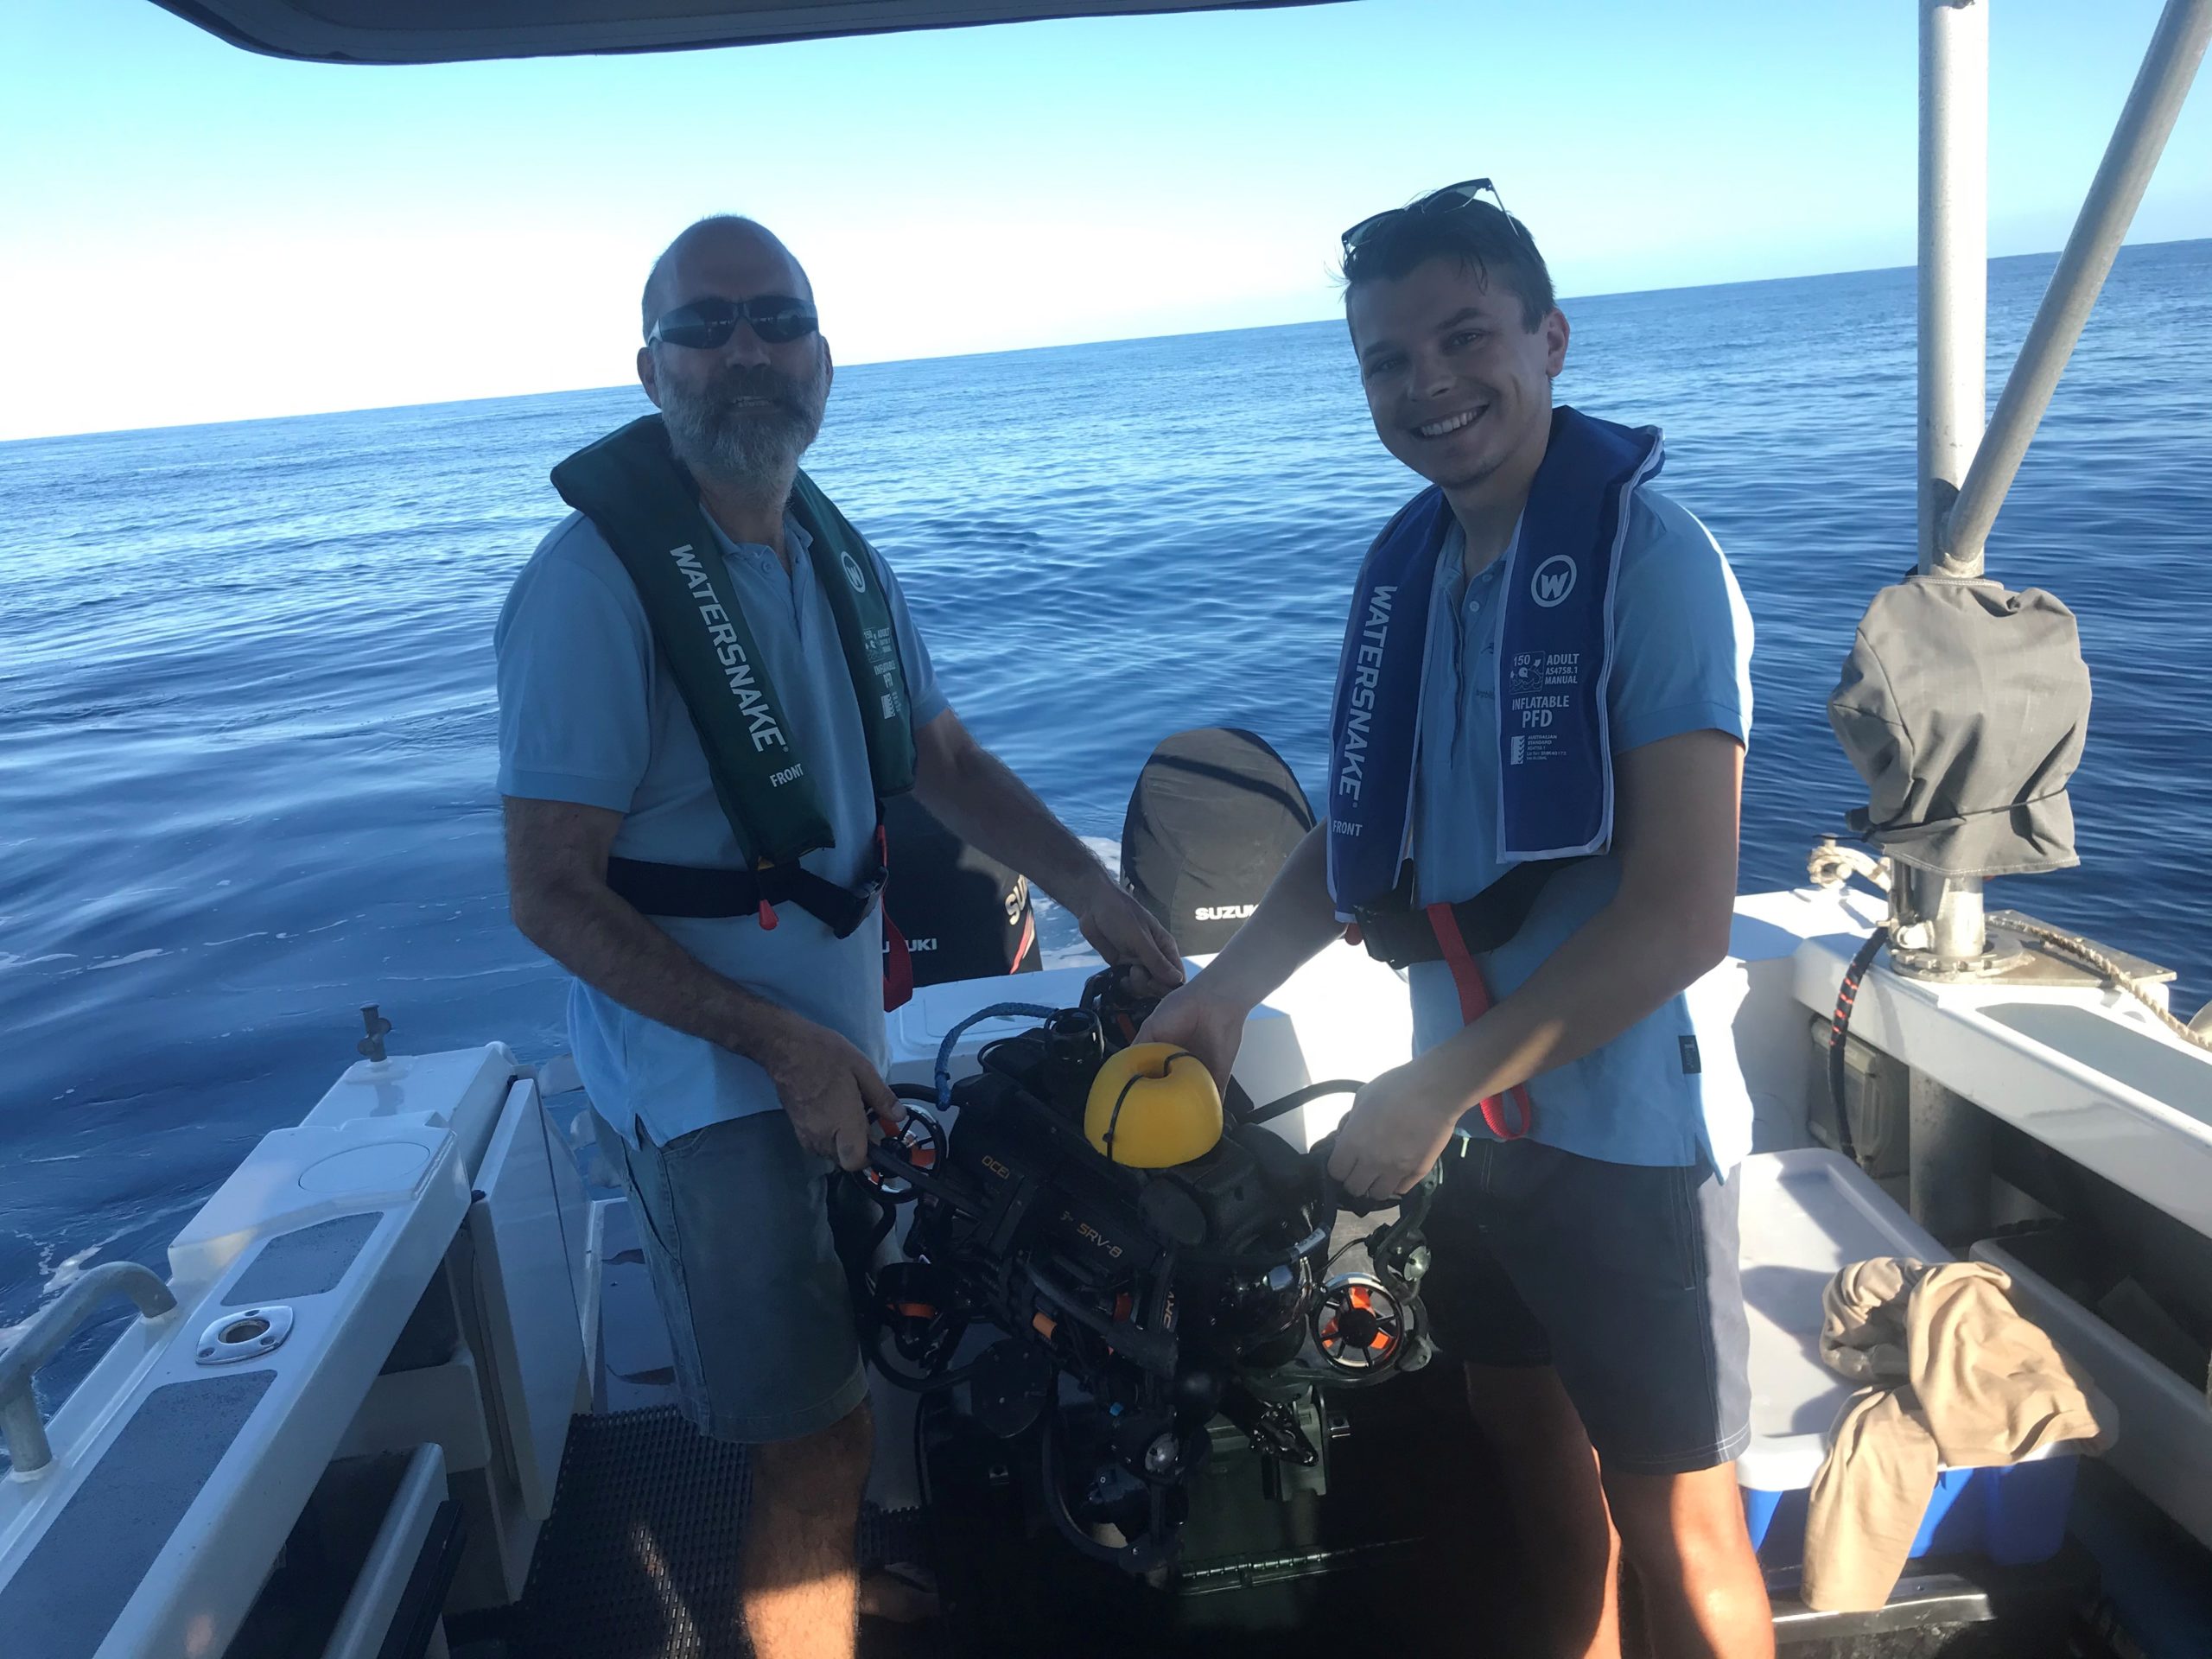 Logan Hellmrich and Nick Mortimer about to deploy an ROV to look at deepwater habitat